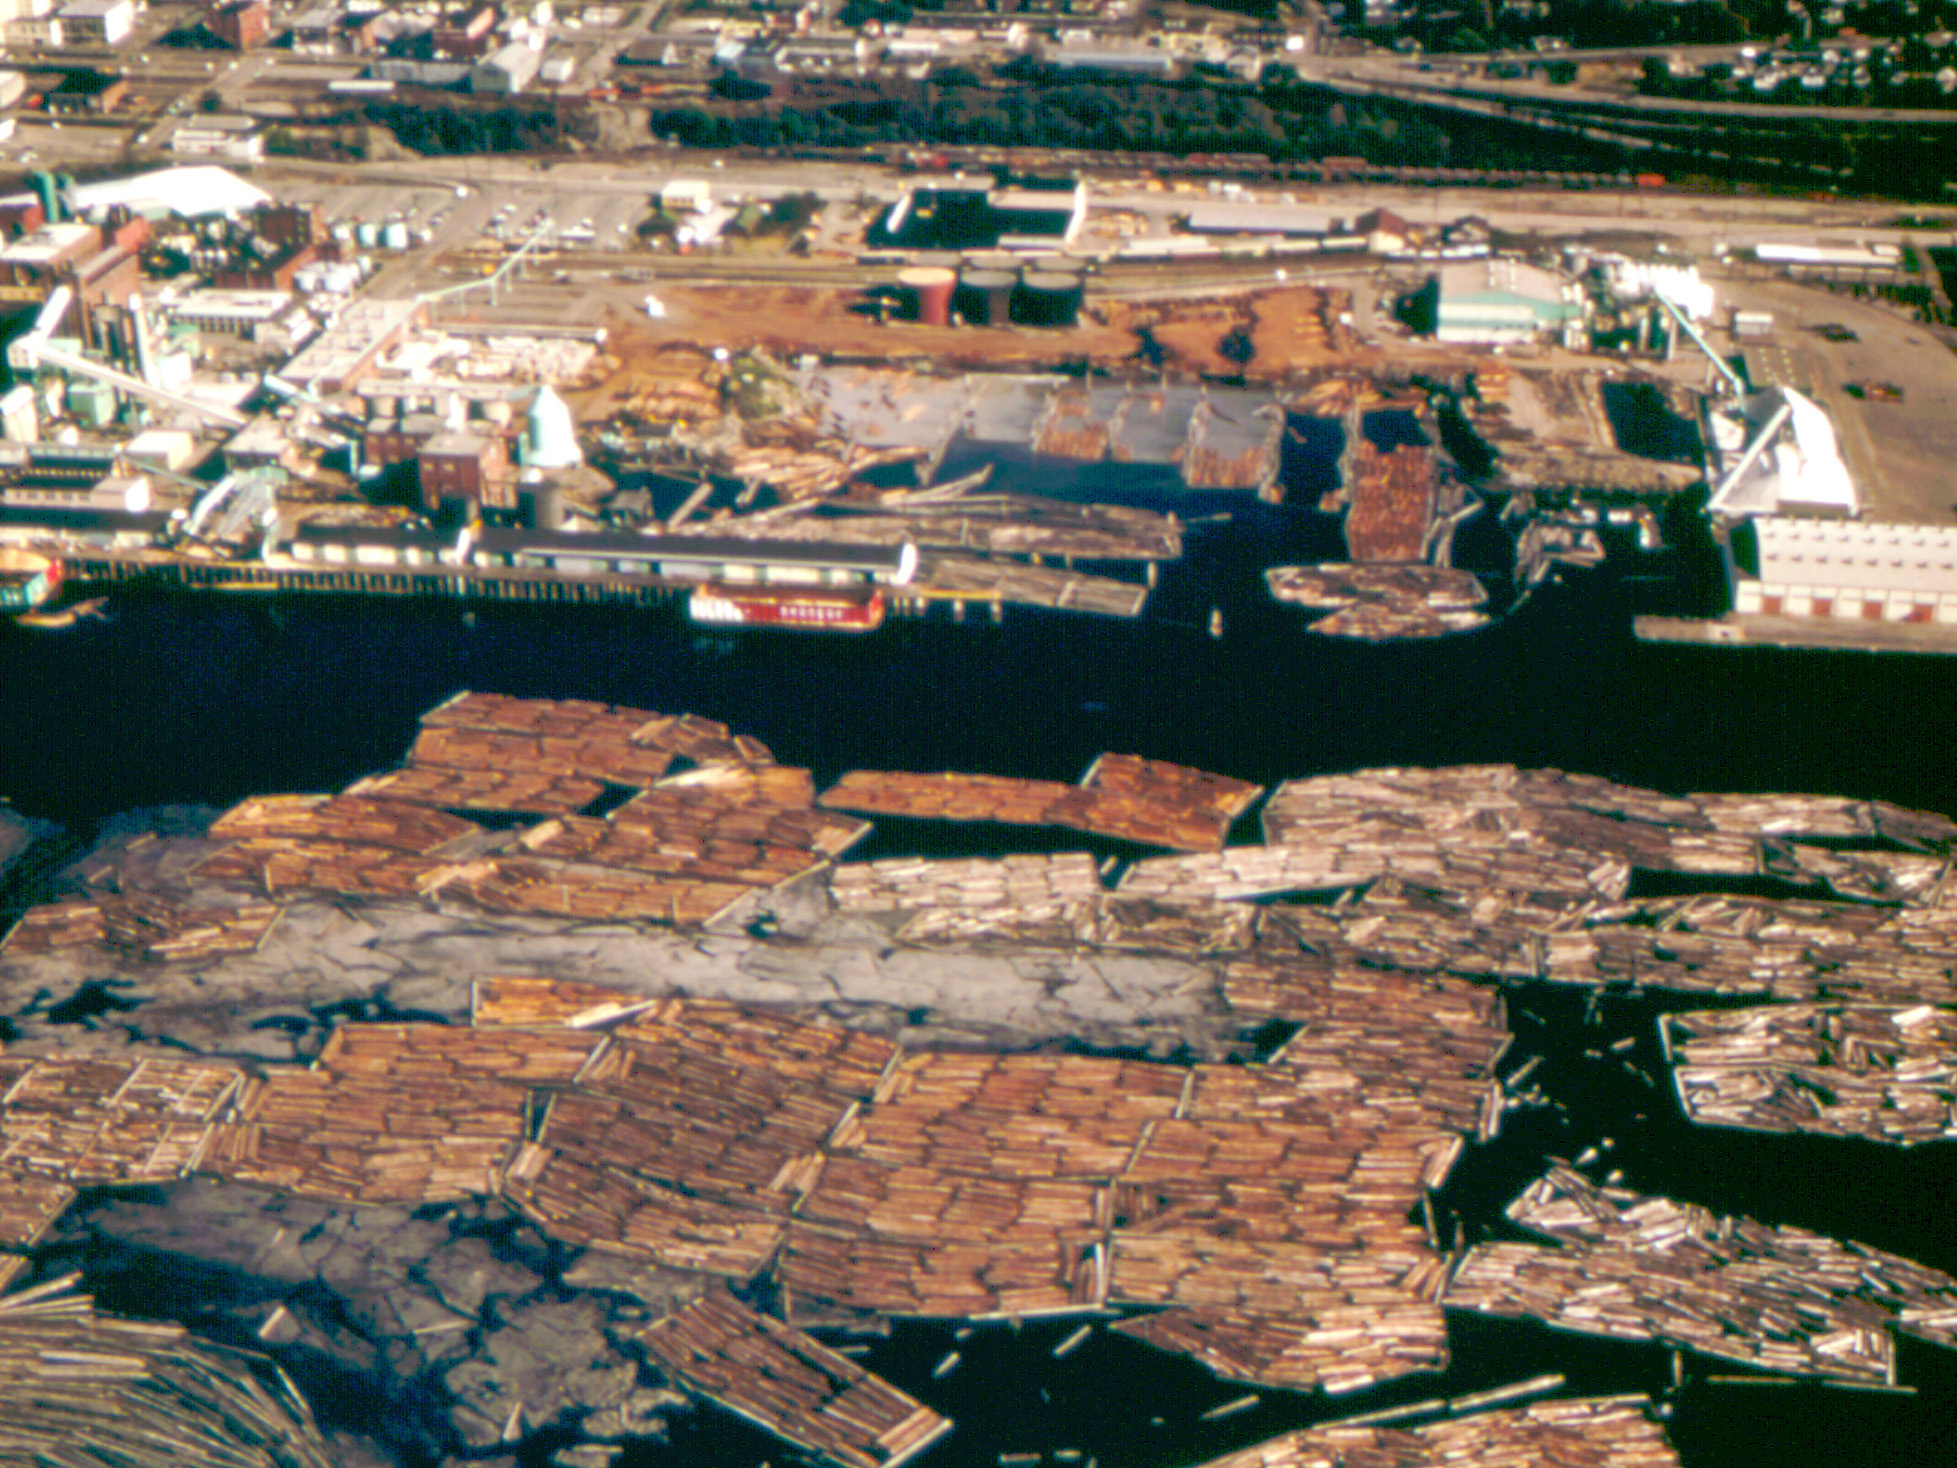 An aerial view of Bellingham Bay showing industry on the shore and thousands of logs floating in the bay.